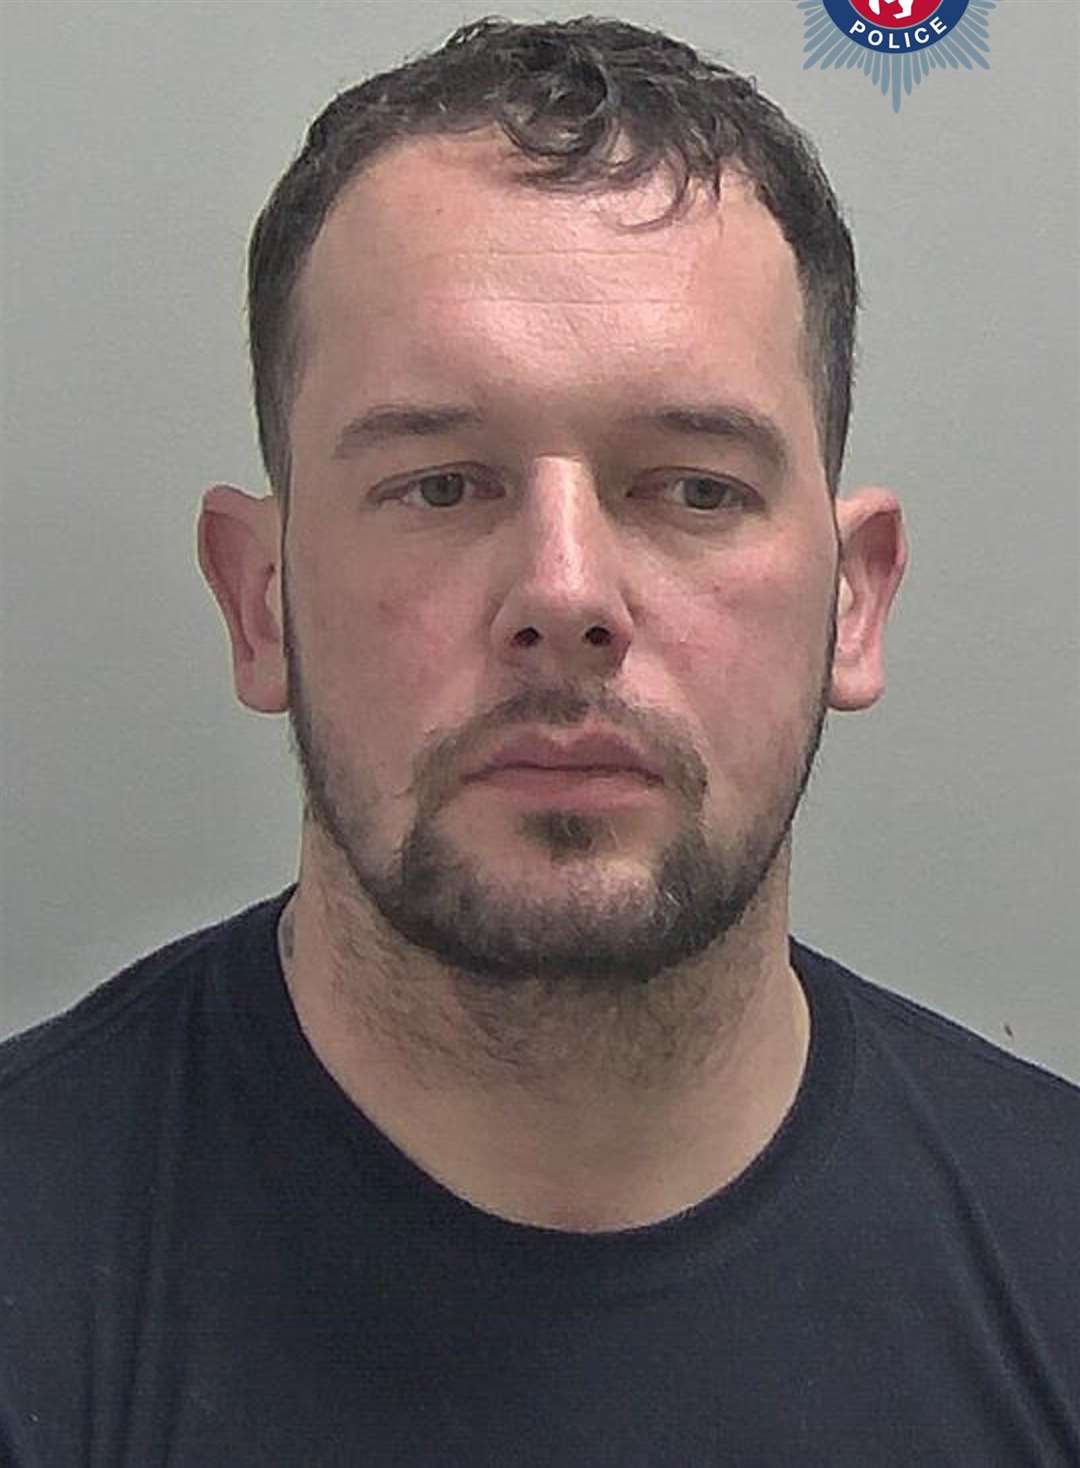 Daniel Bale, 37, of Station Road, Maidstone, Picture: Warwickshire Police